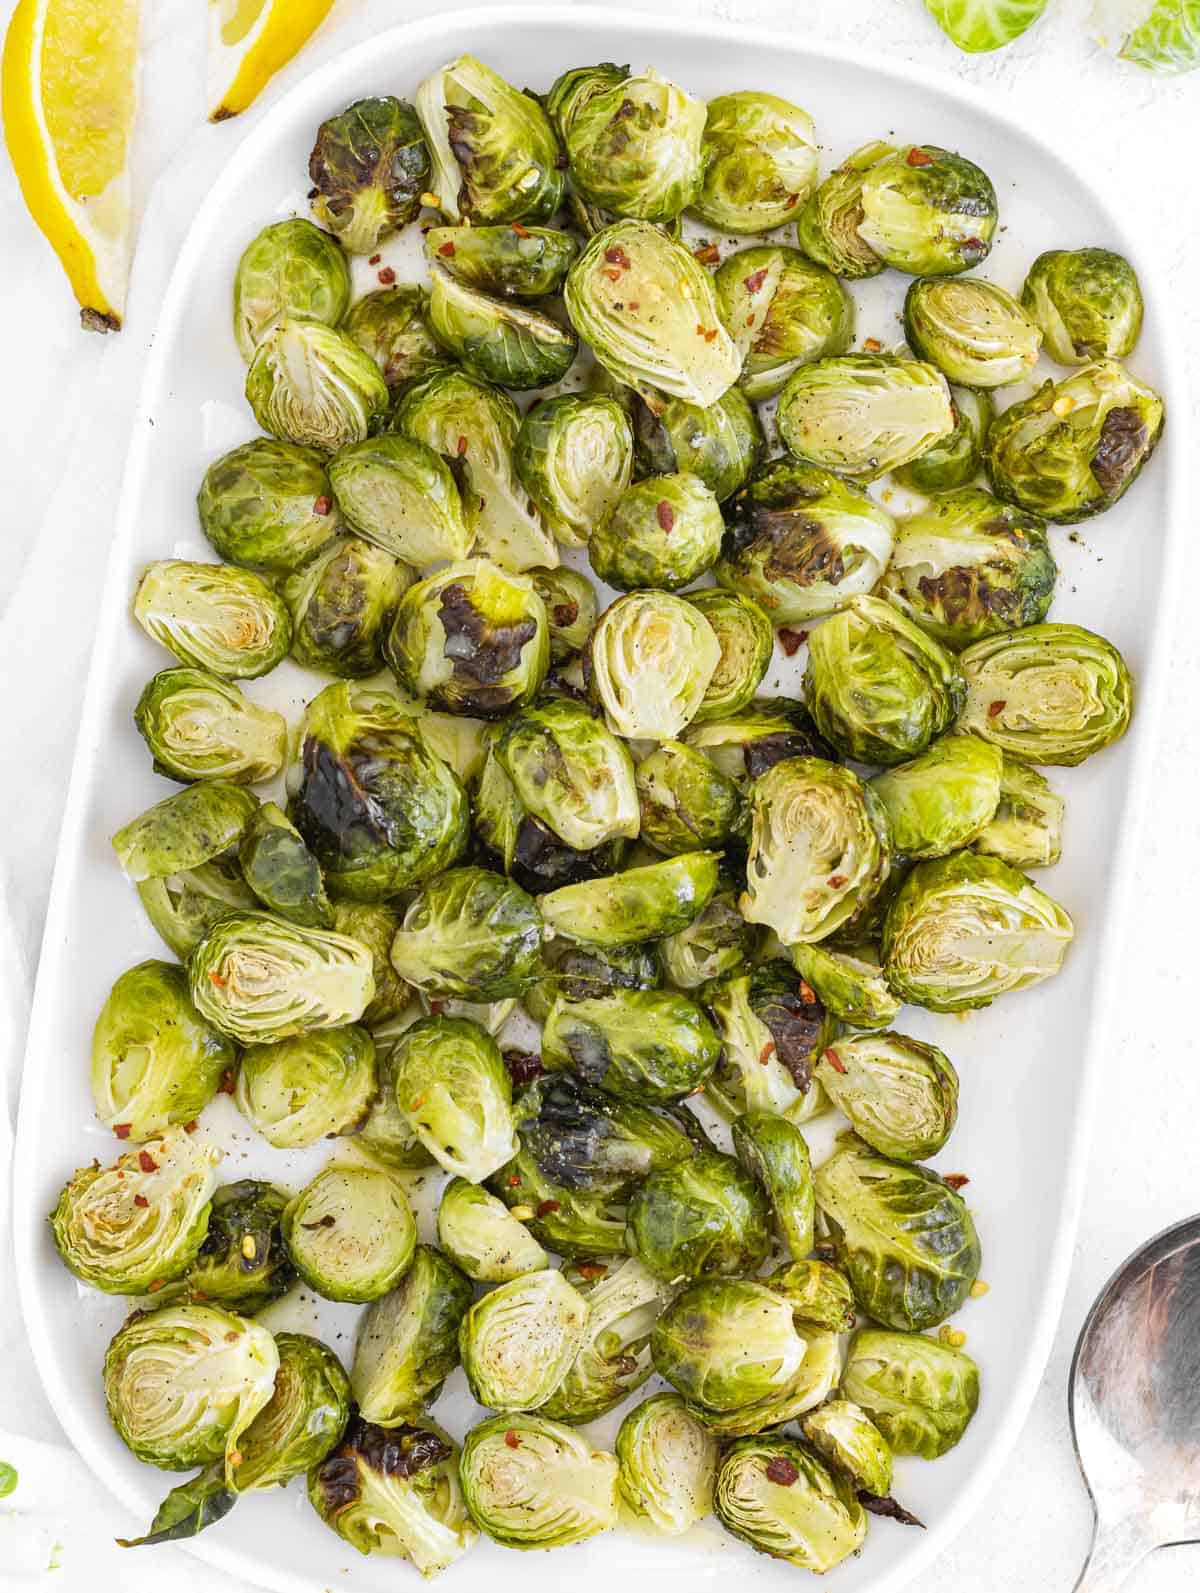 Roasted brussels sprouts on a platter